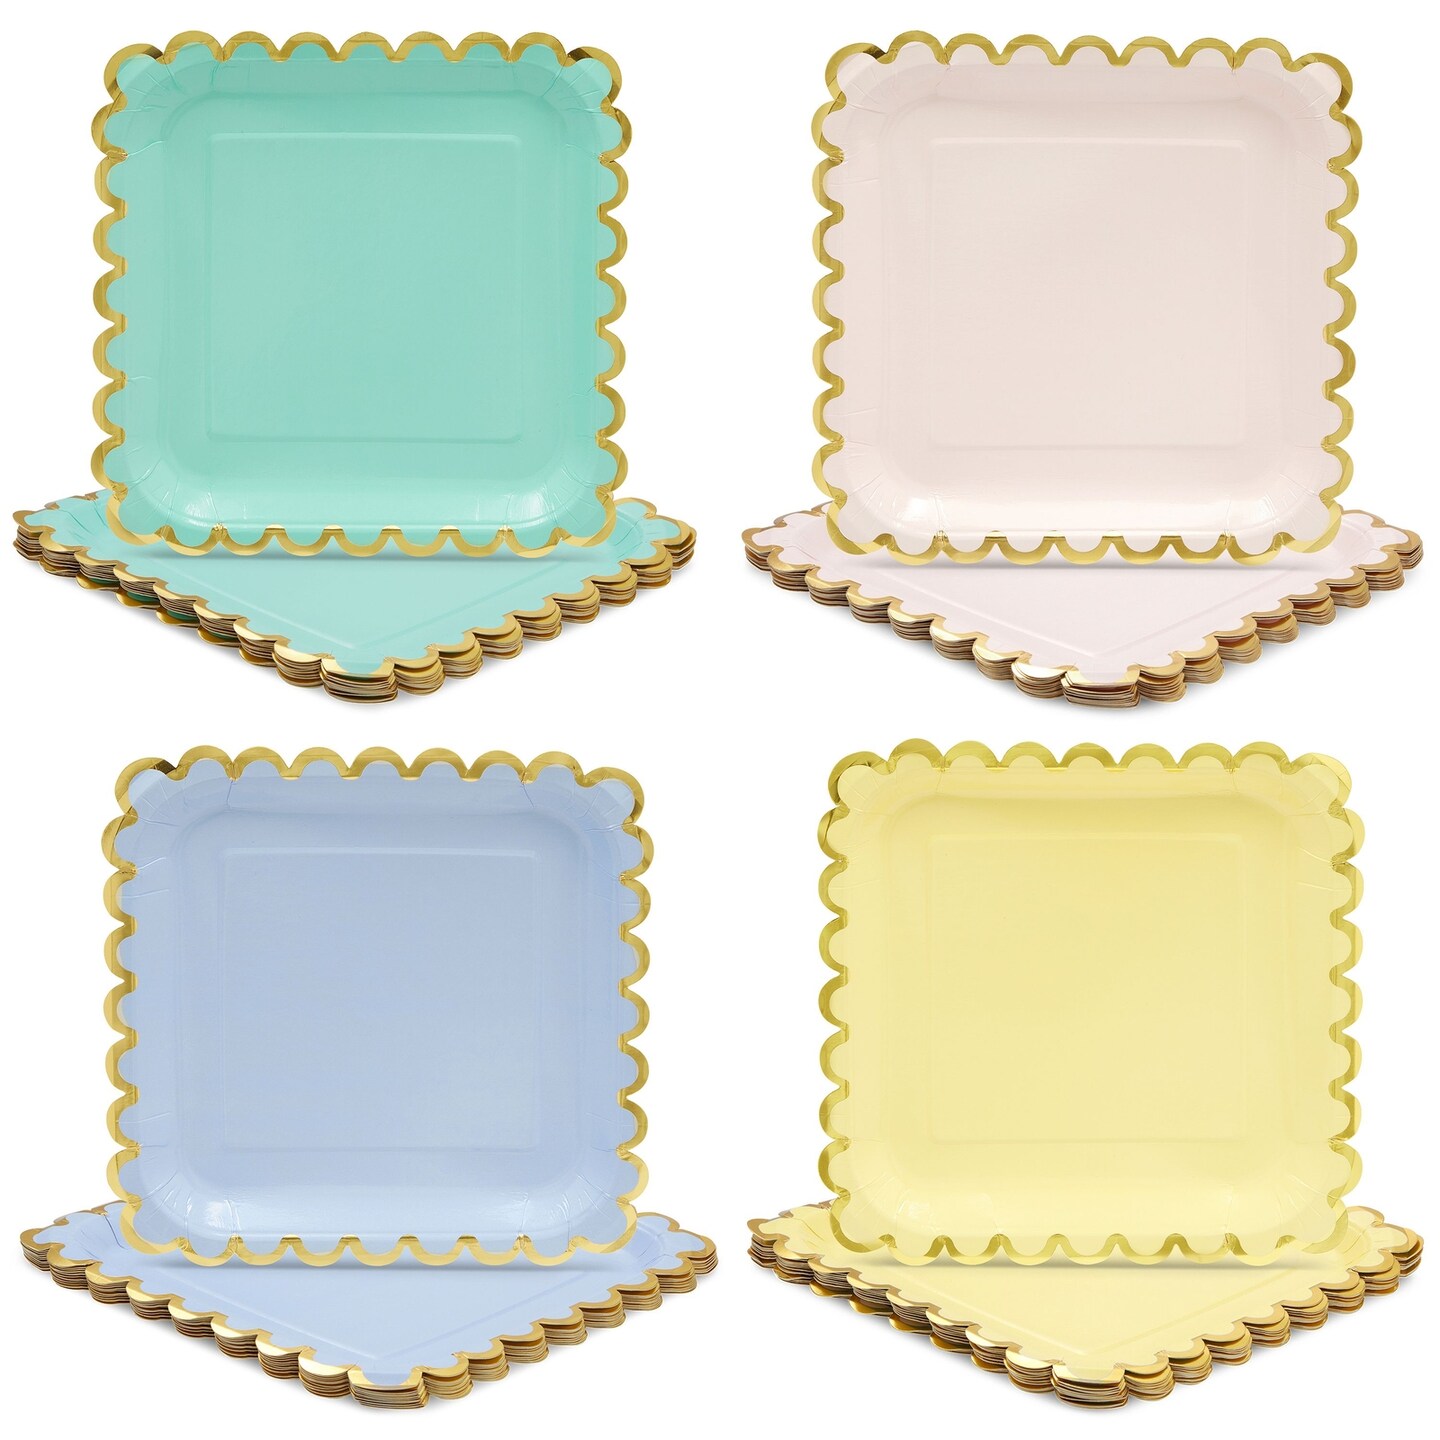 Pastel Paper Plates with Scalloped Gold Foil (9 Inches, 48 Pack)